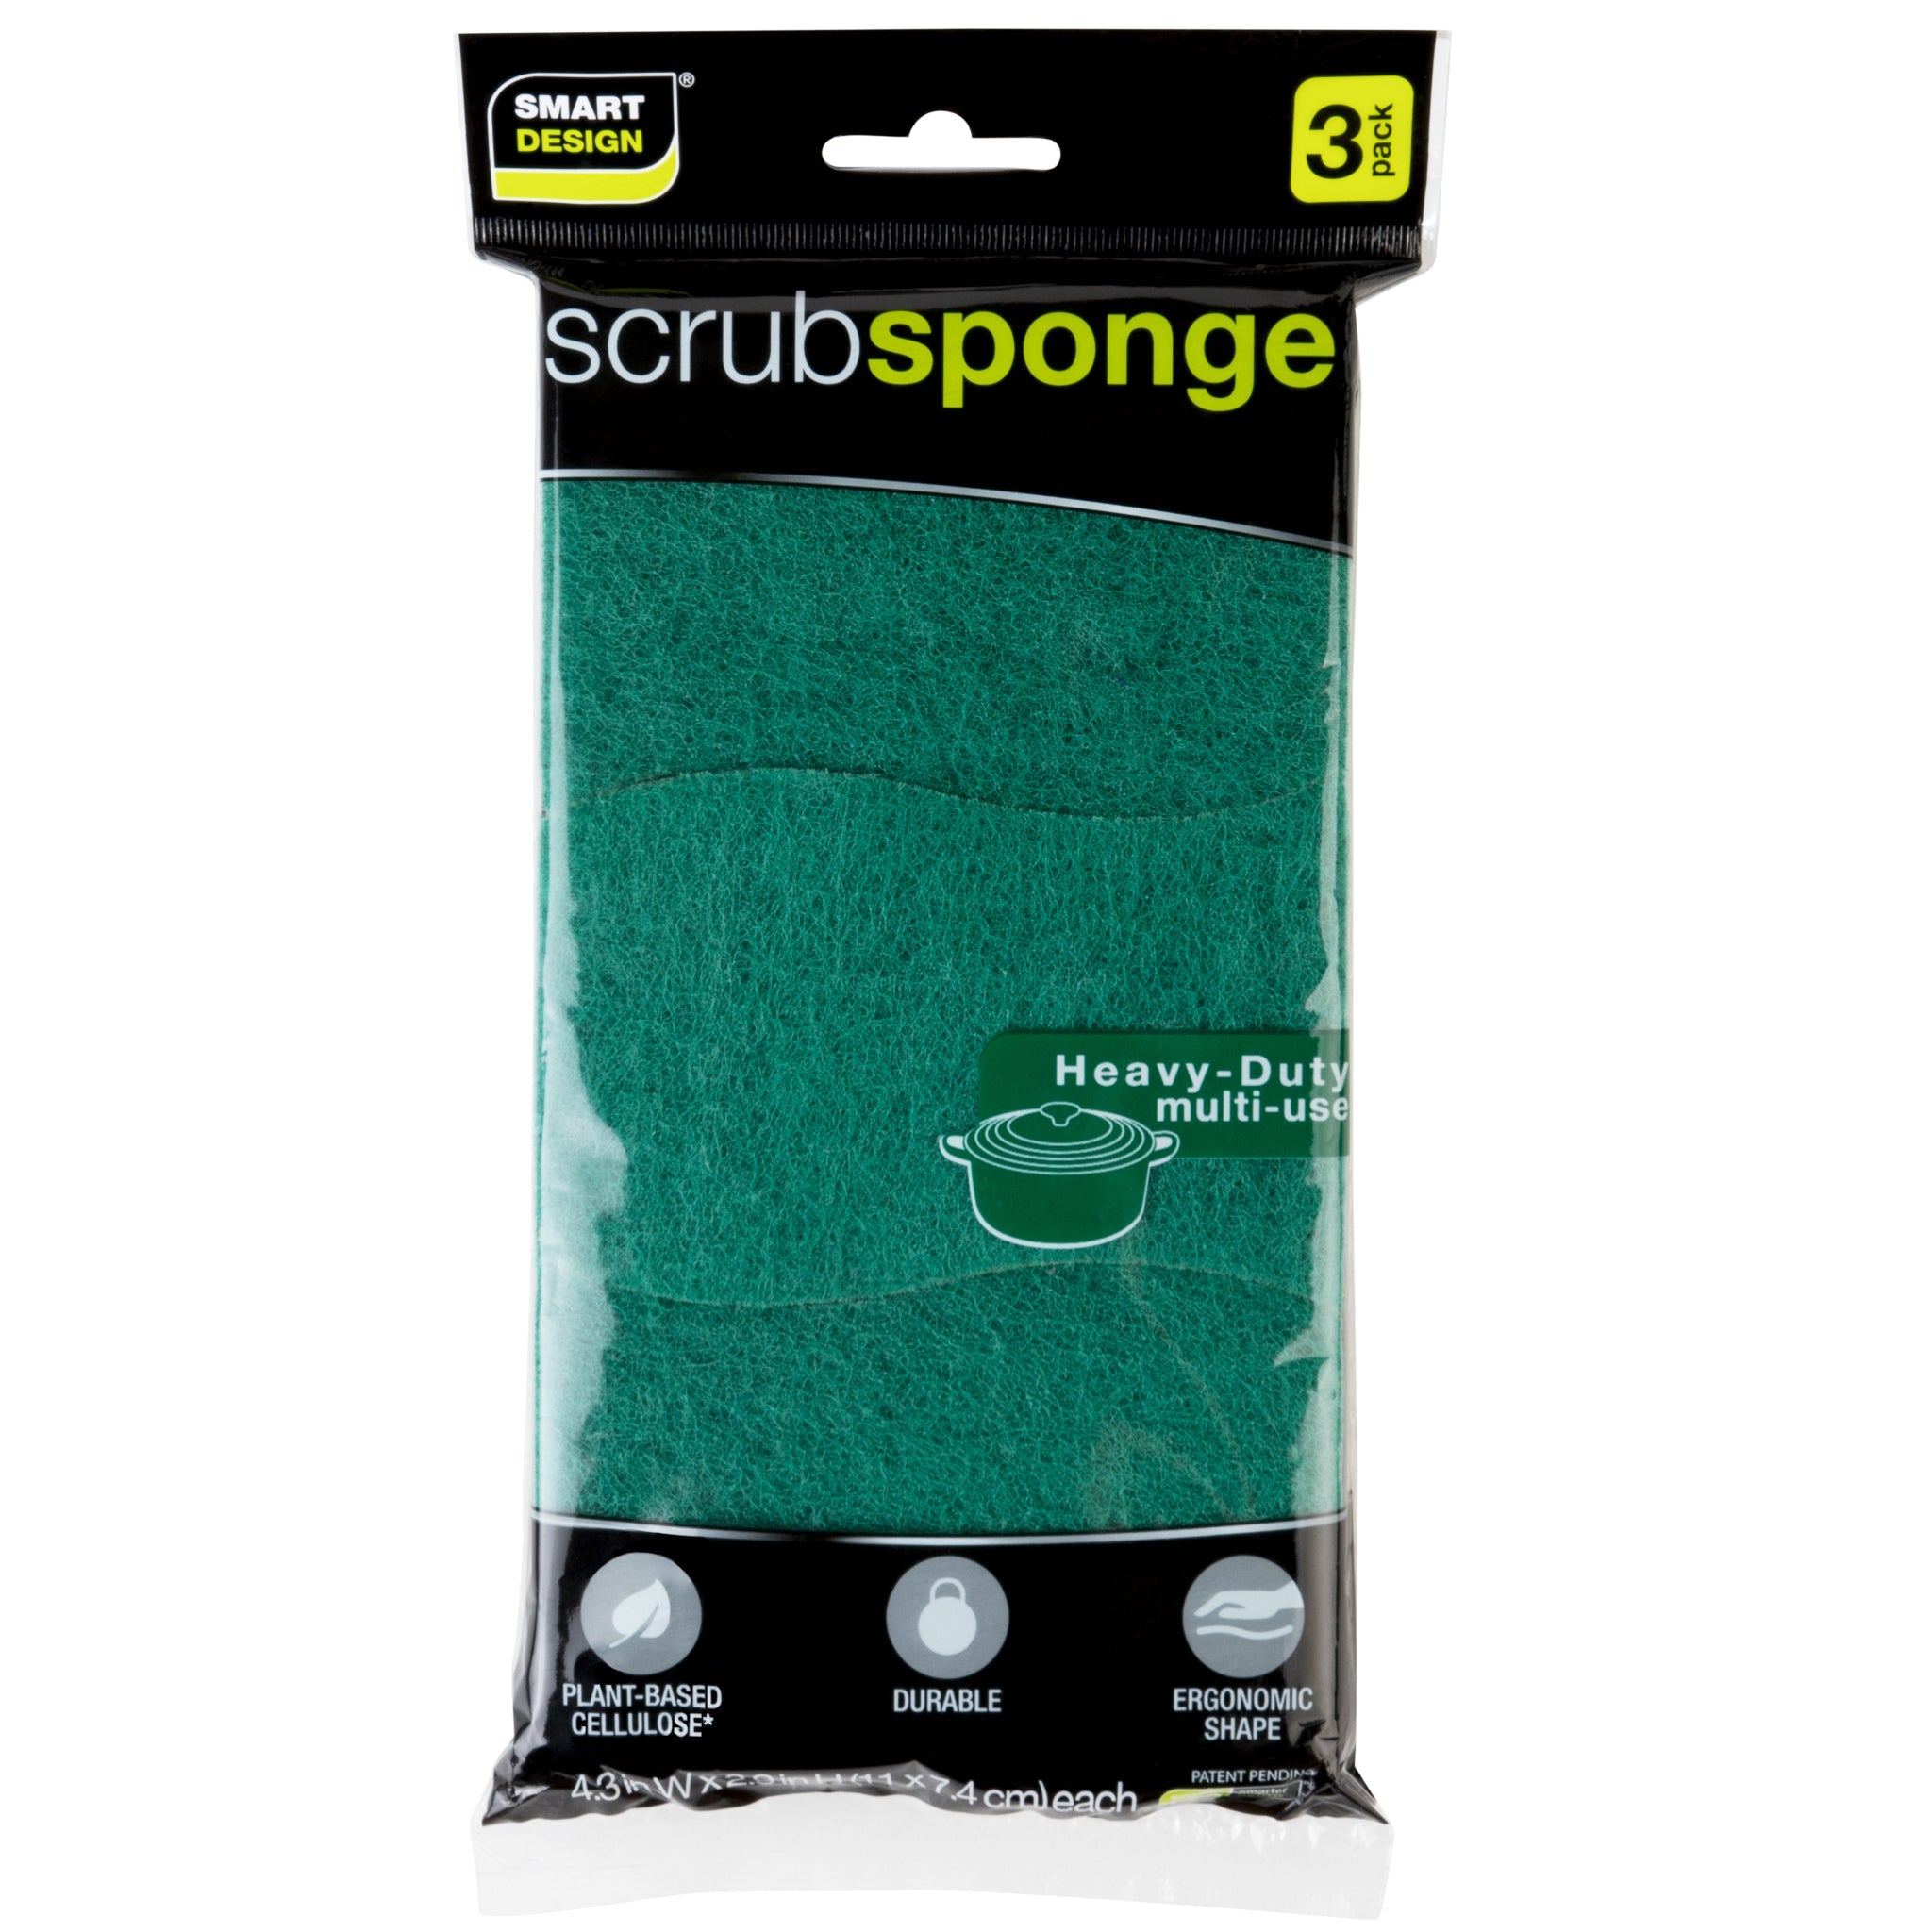 Heavy Duty Scrub Sponge - Ultra Absorbent - Ergonomic Shape - Cleaning, Dishes, & Hard Stains - Green by Smart Design 4